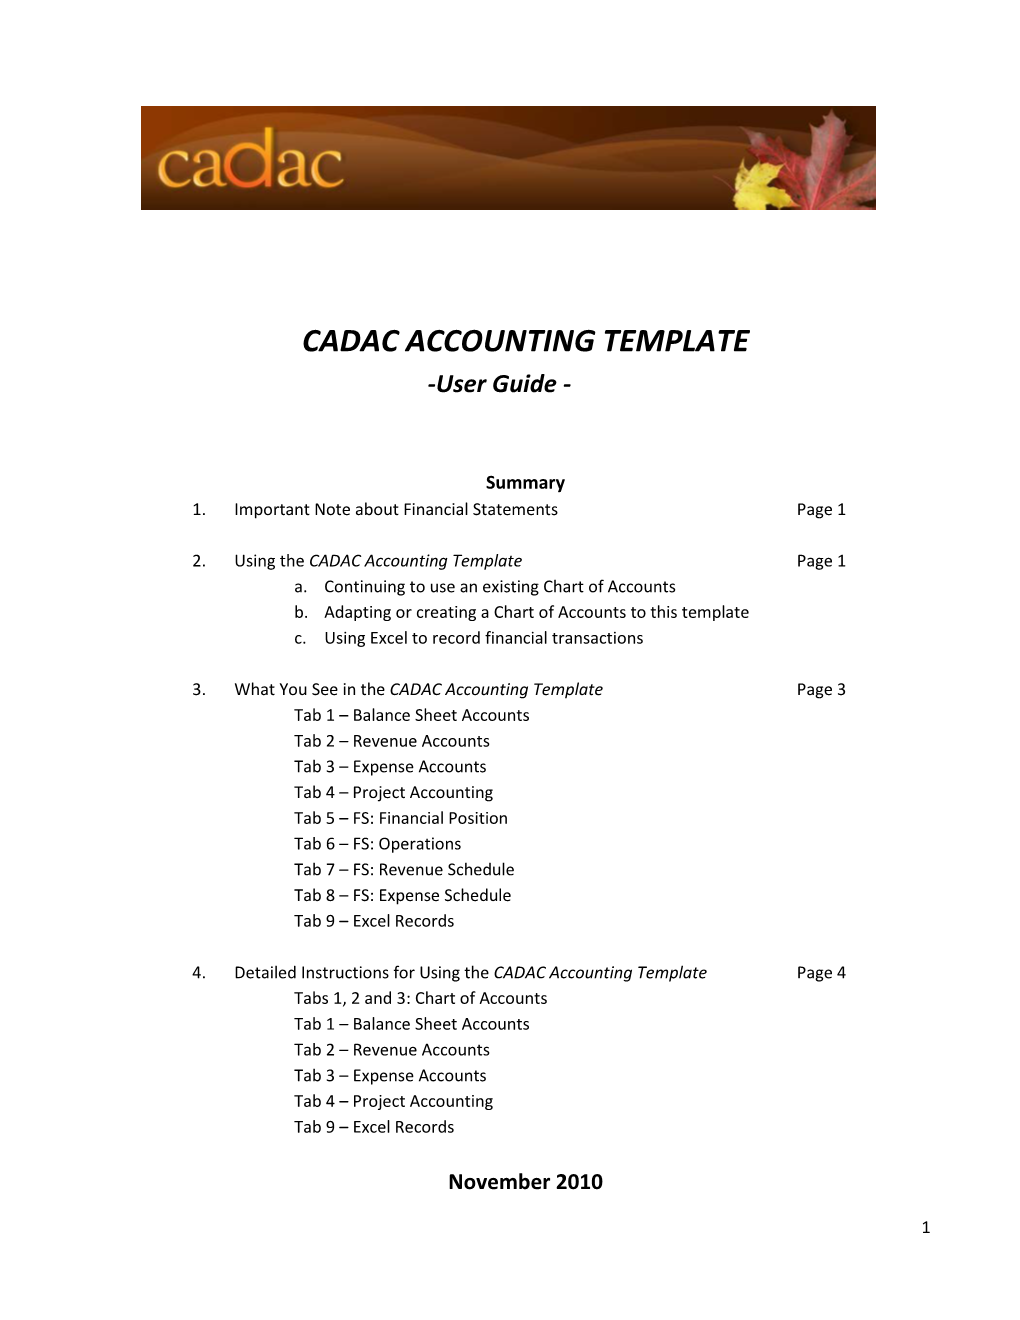 CADAC ACCOUNTING TEMPLATE -User Guide